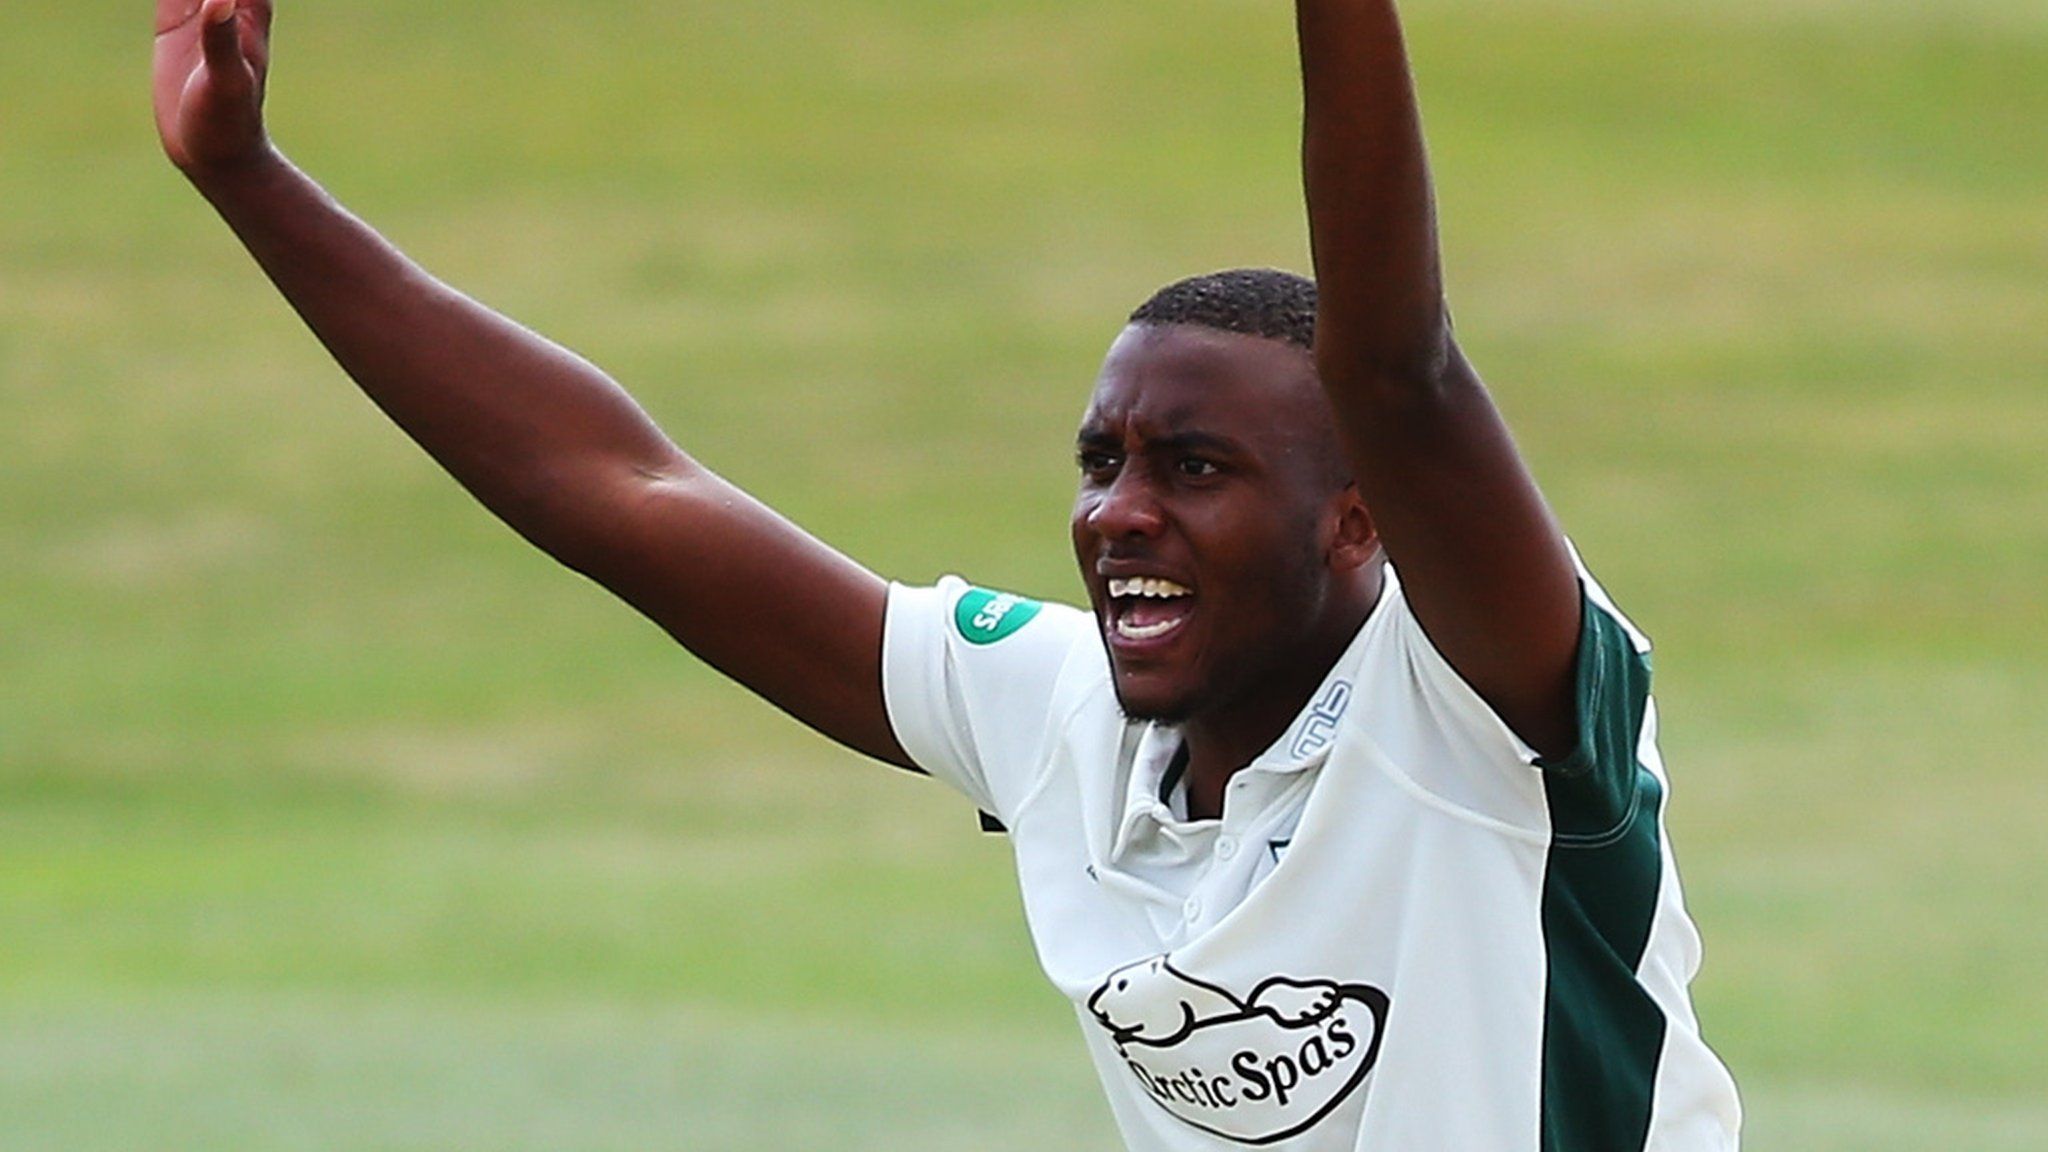 Worcestershire and West Indies fast bowler Miguel Cummins